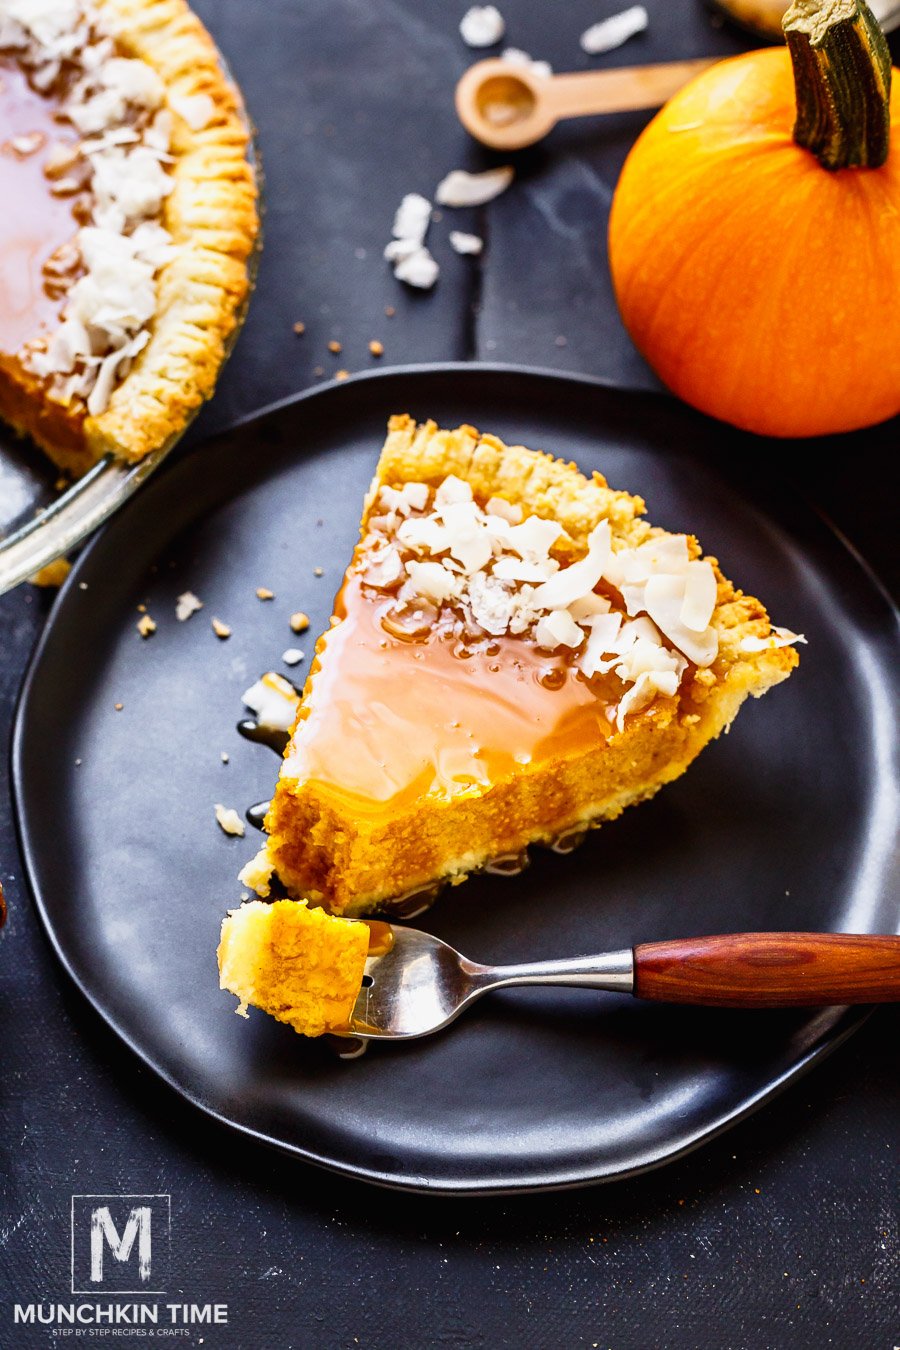 This homemade Gluten Free Pumpkin Pie aka Thanksgiving dessert recipe is one of the classic Holiday treats with a twist.